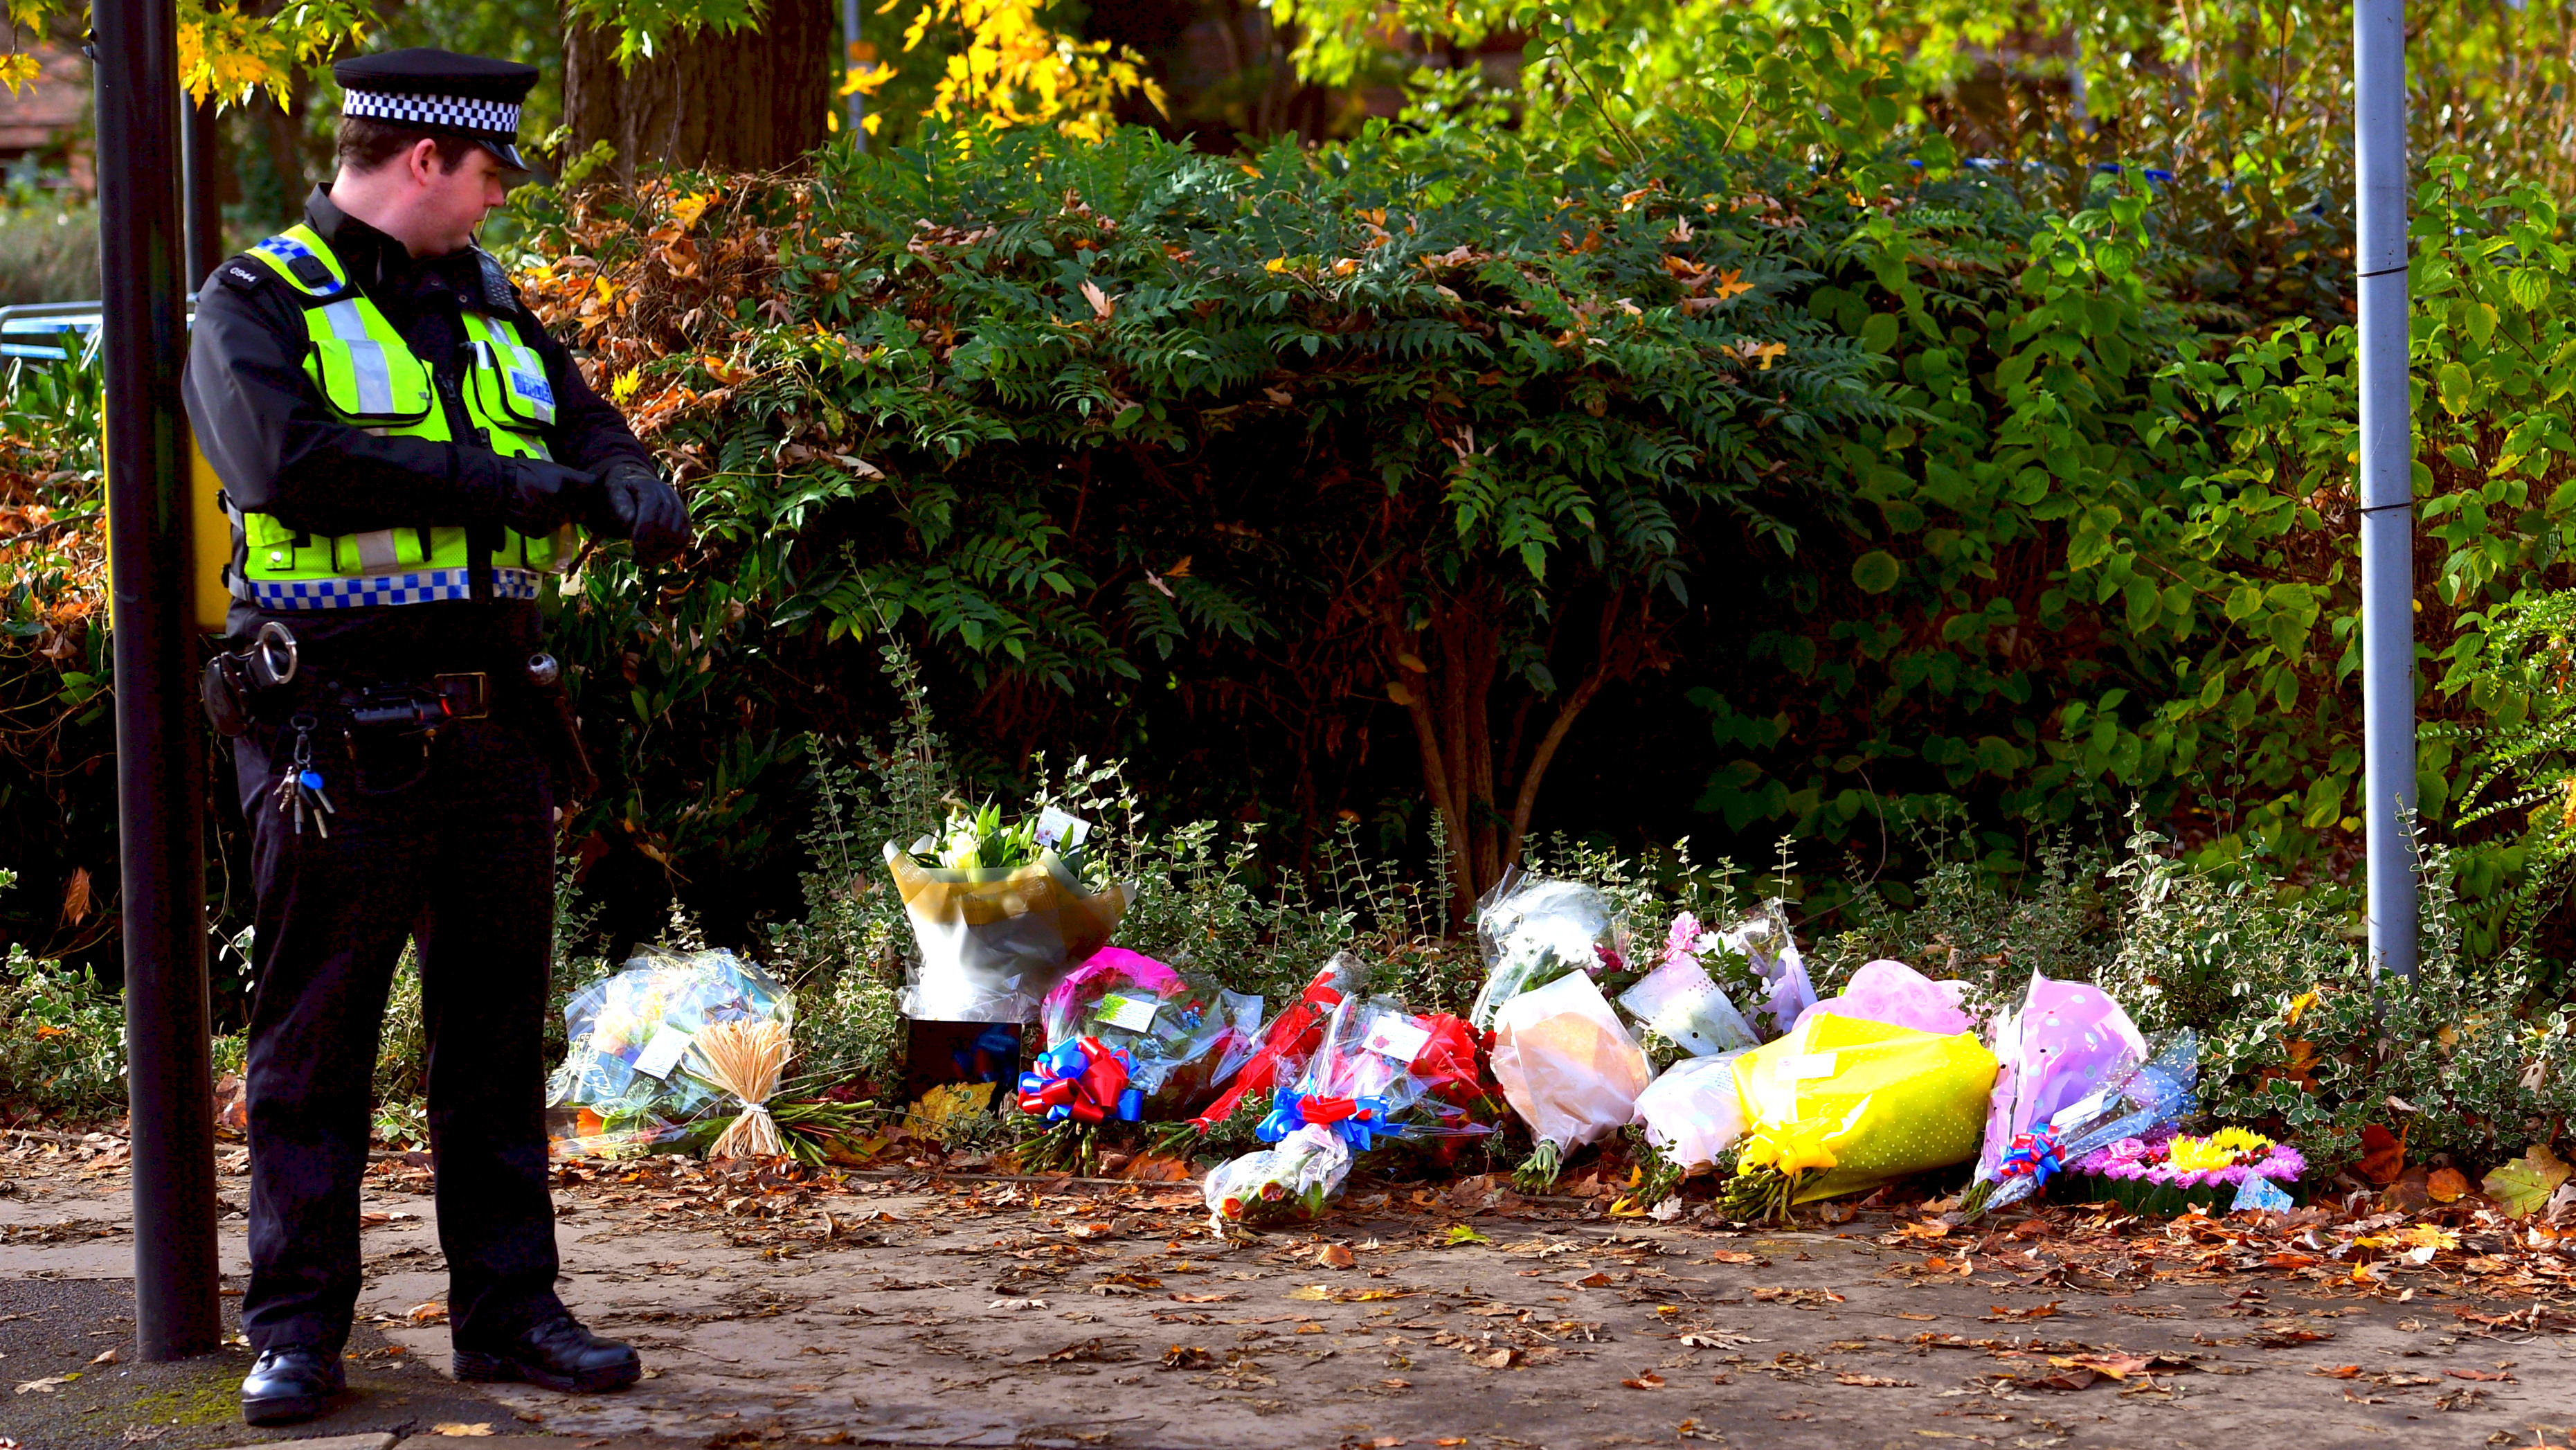 A police officer looks at flowers left near the scene of a fatal tram crash in Croydon, south London